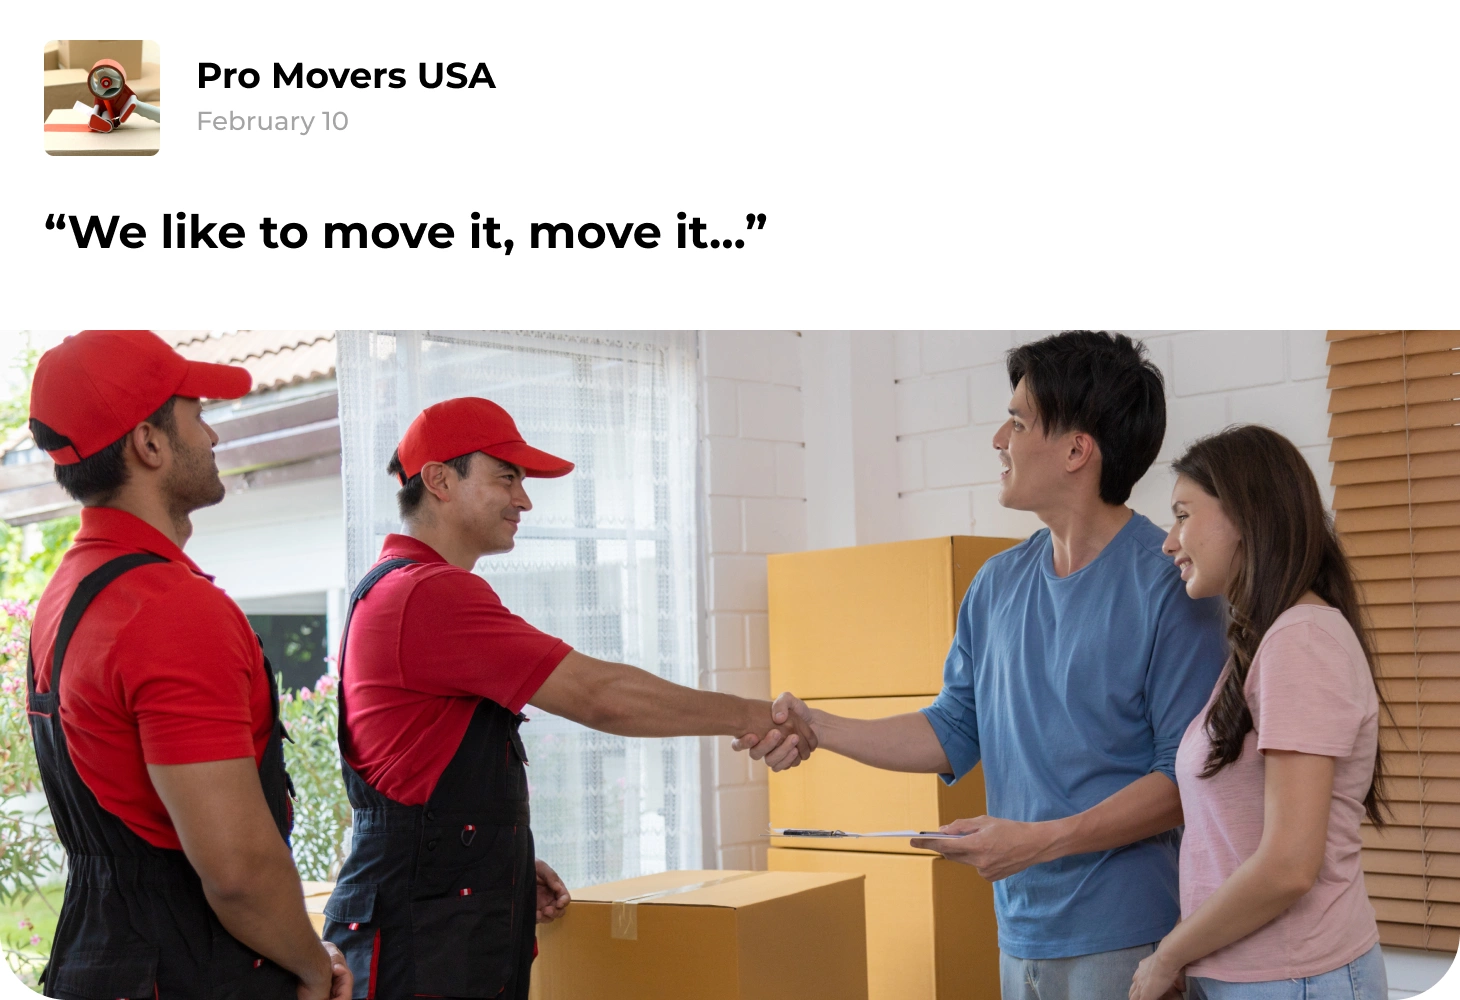 Promoting your moving company online